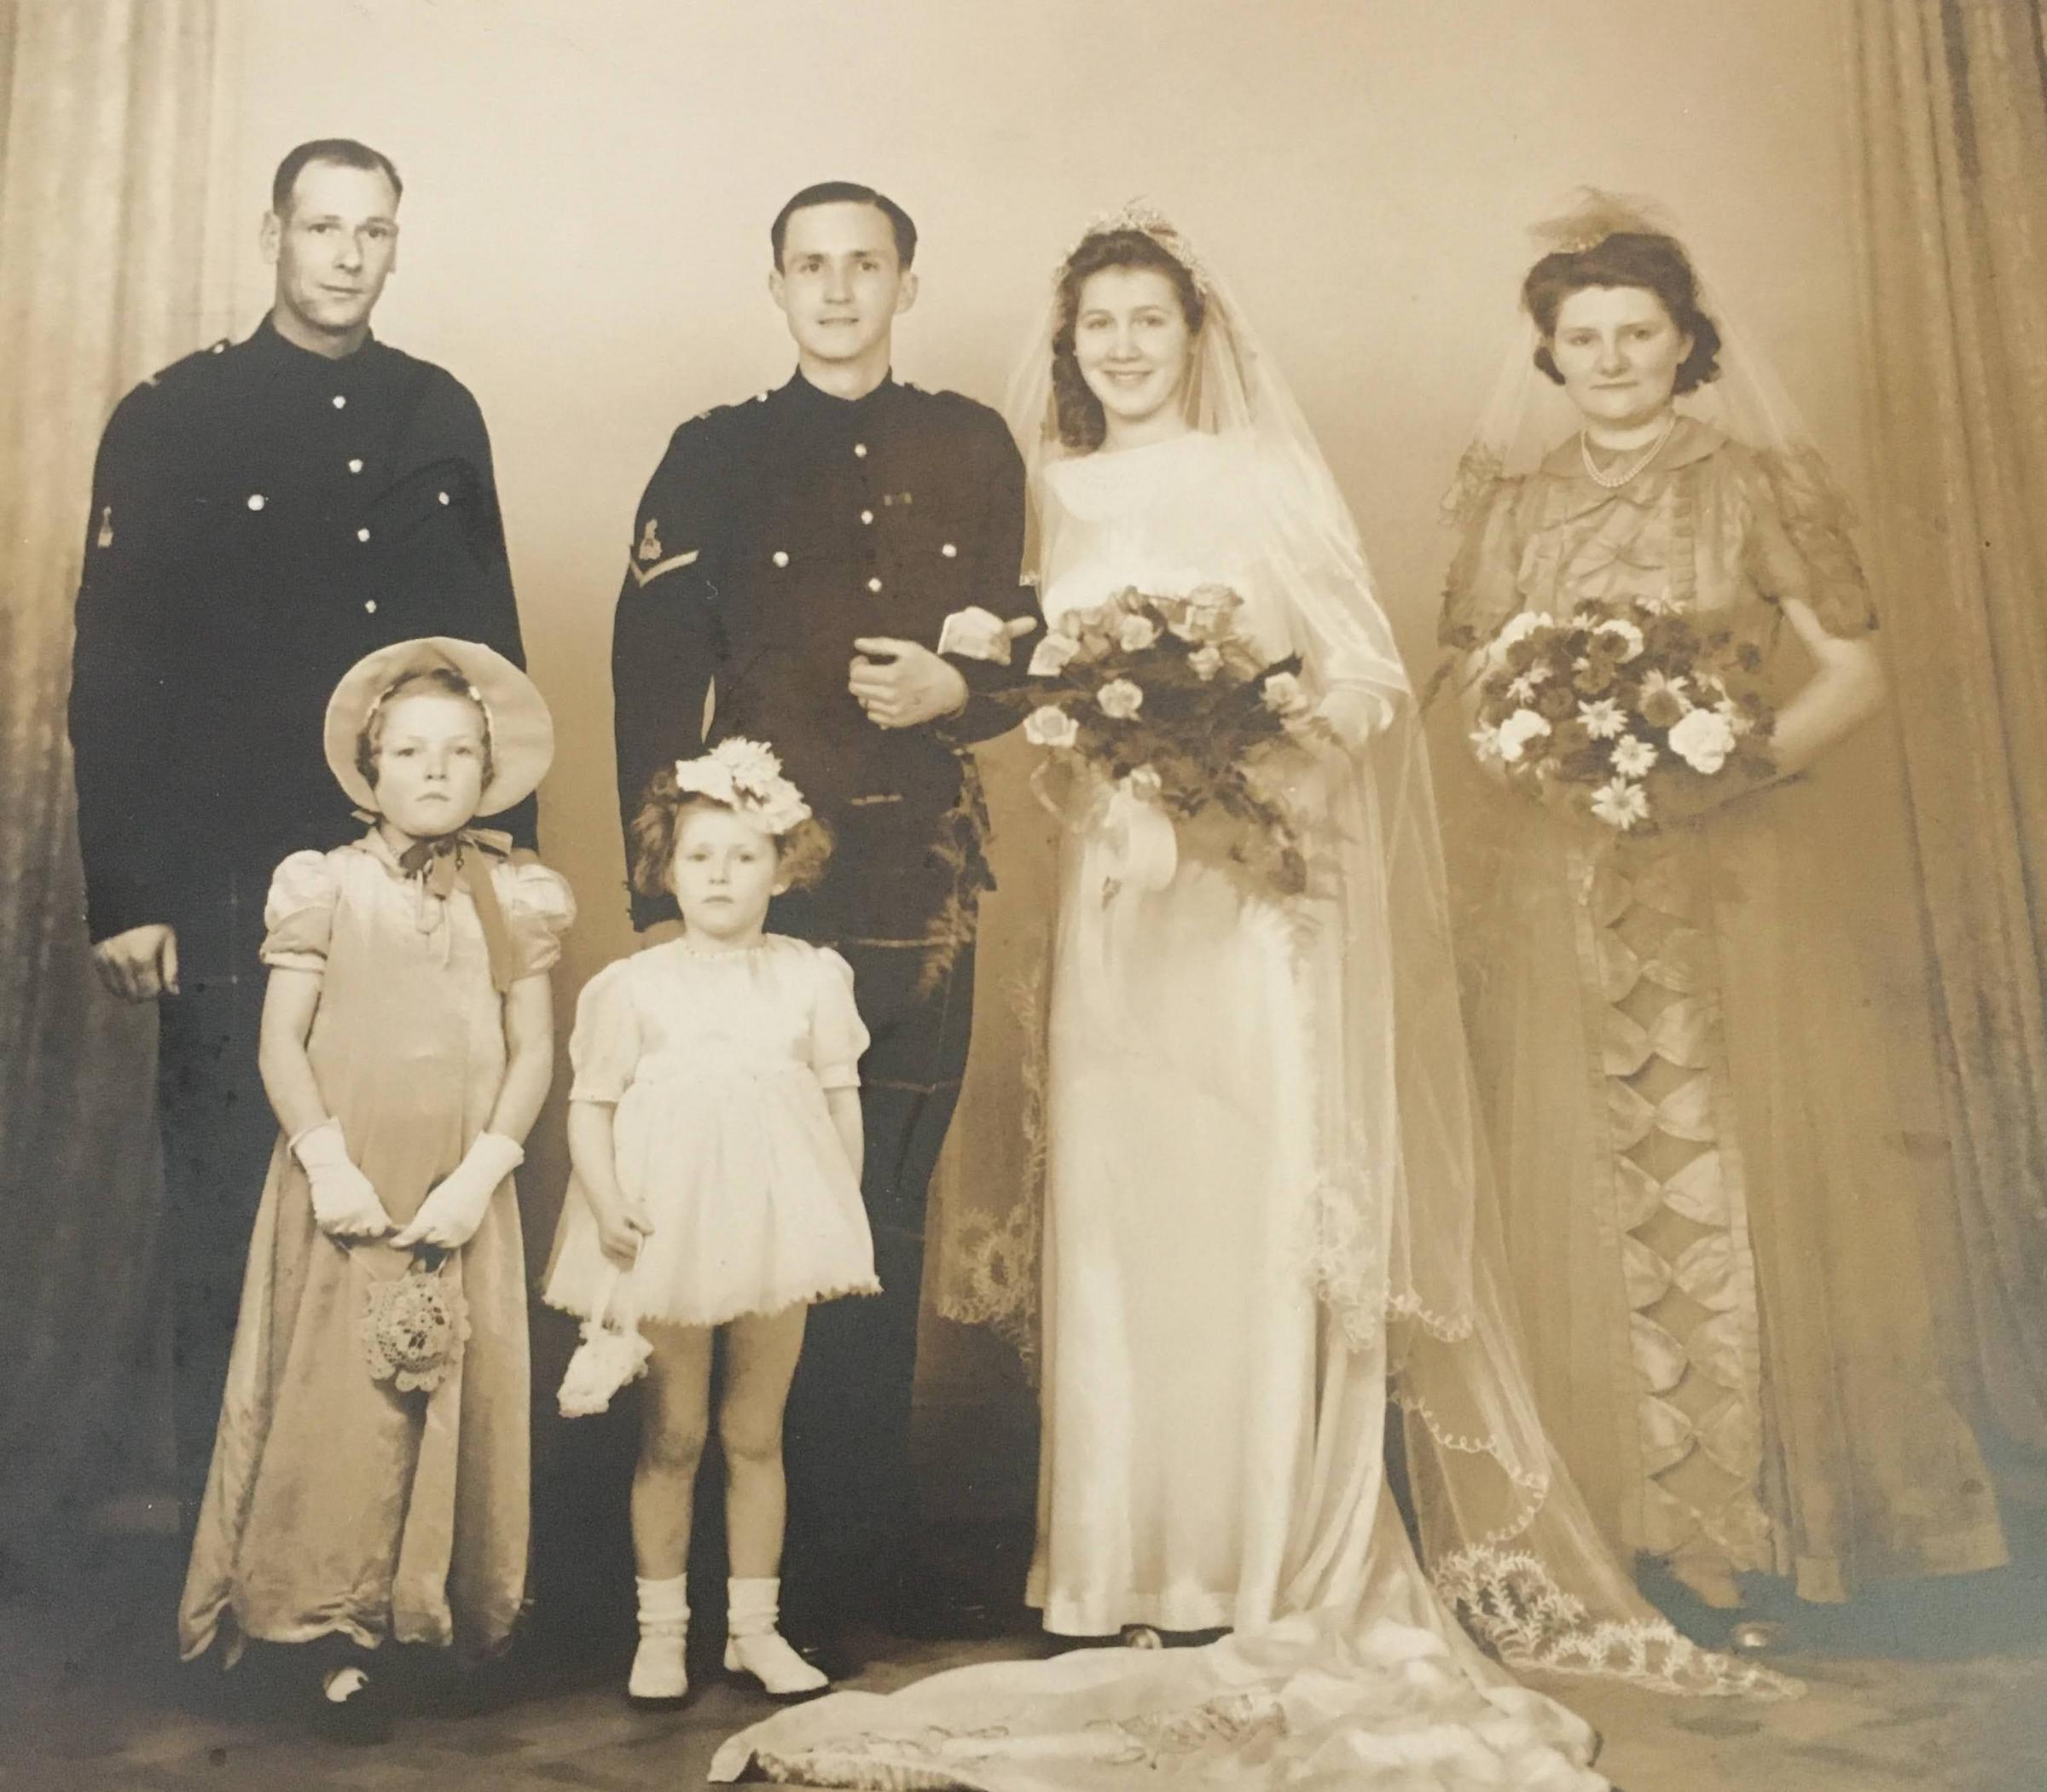 Jane and William were married at Maryhill Barracks in 1943.